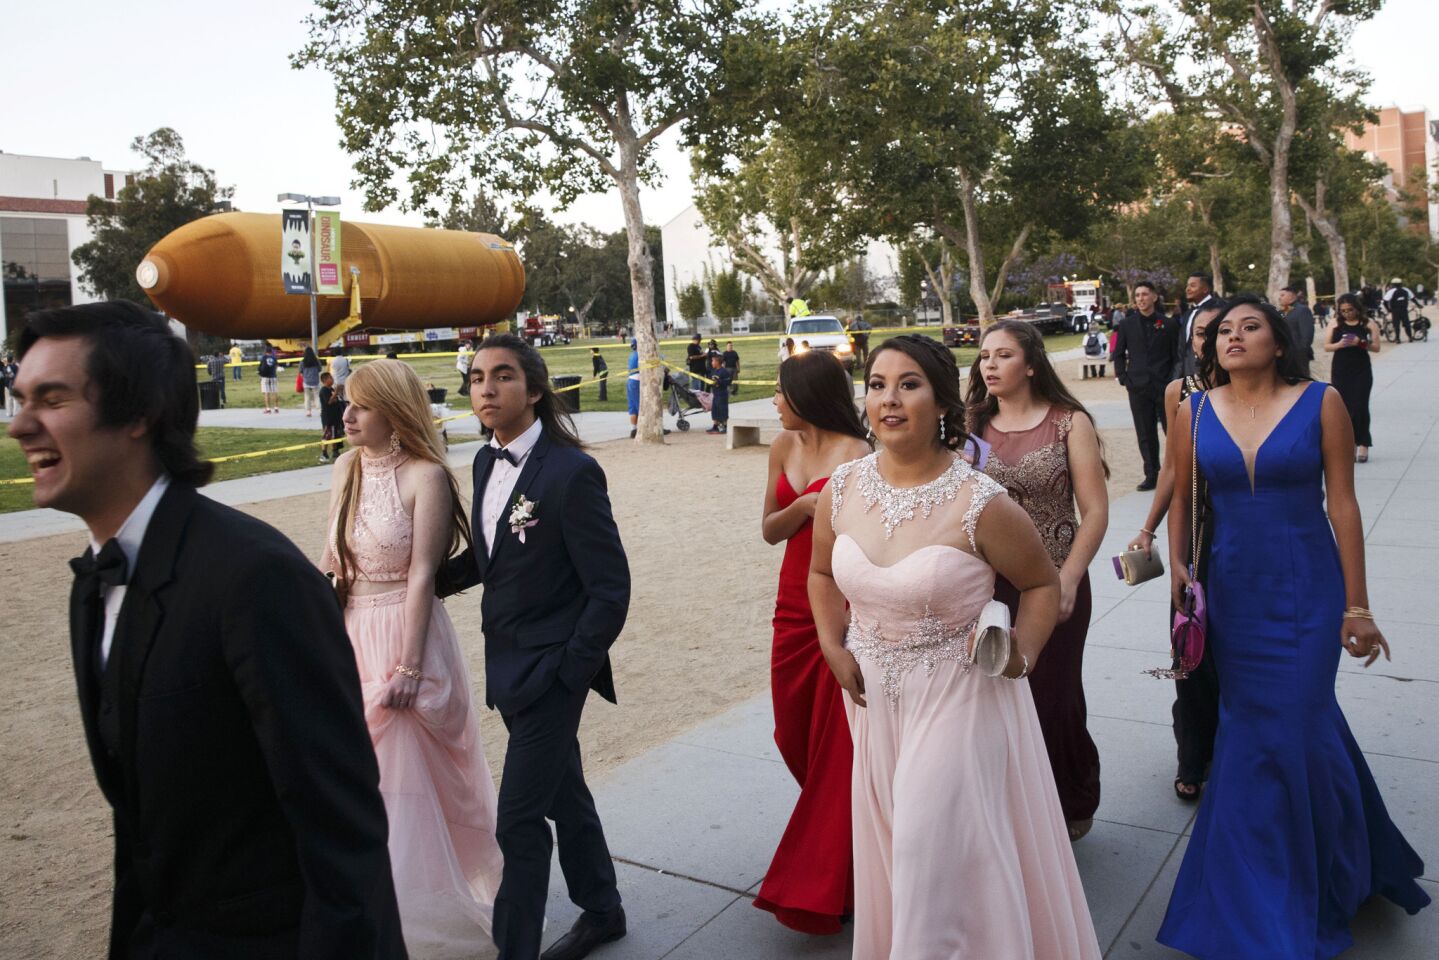 High school students from Downey walk to prom as the ET-94 fuel tank rests outside the California Science Center.